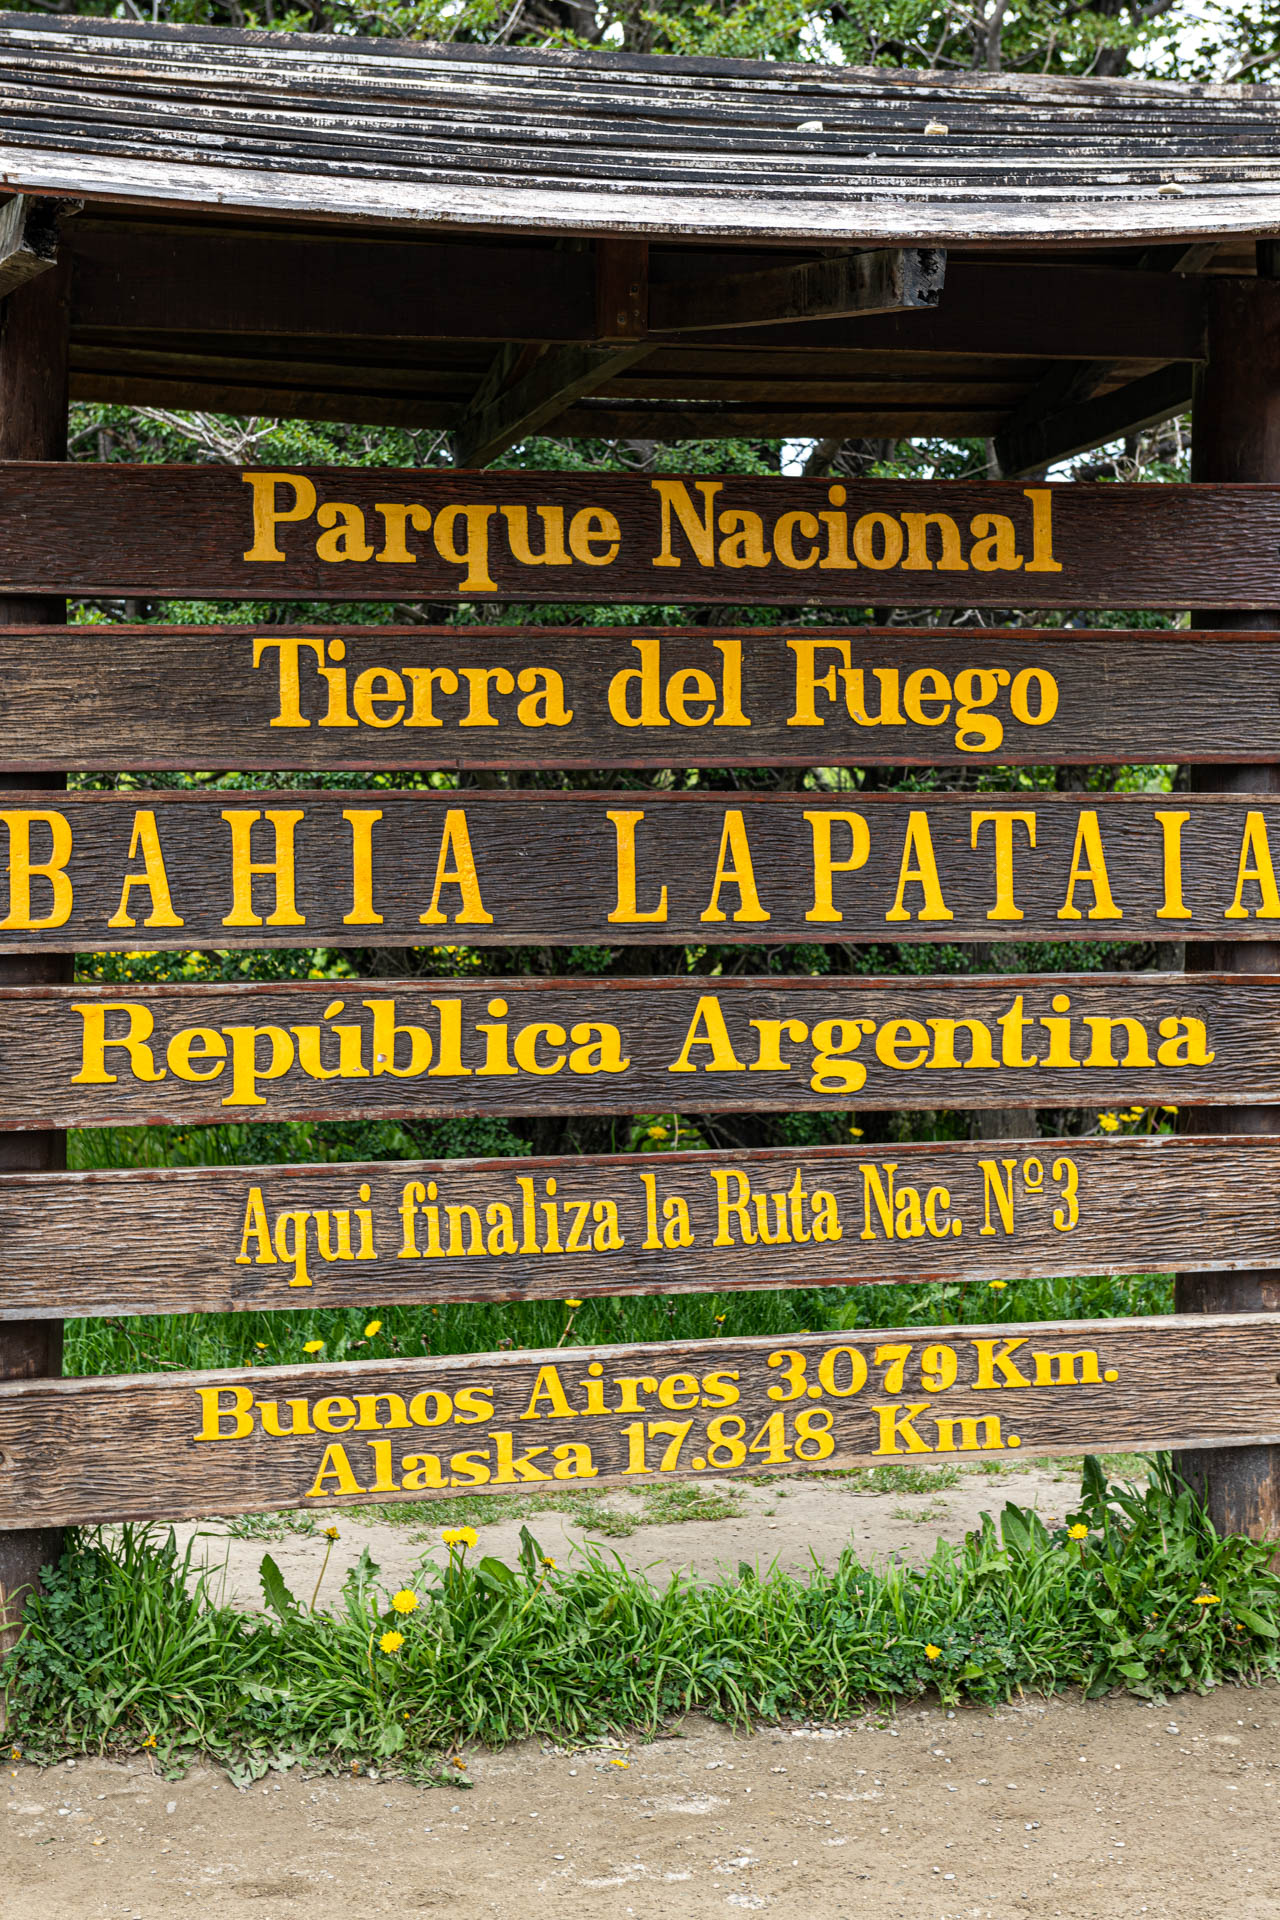 Southern limit of the Pan-American Highway